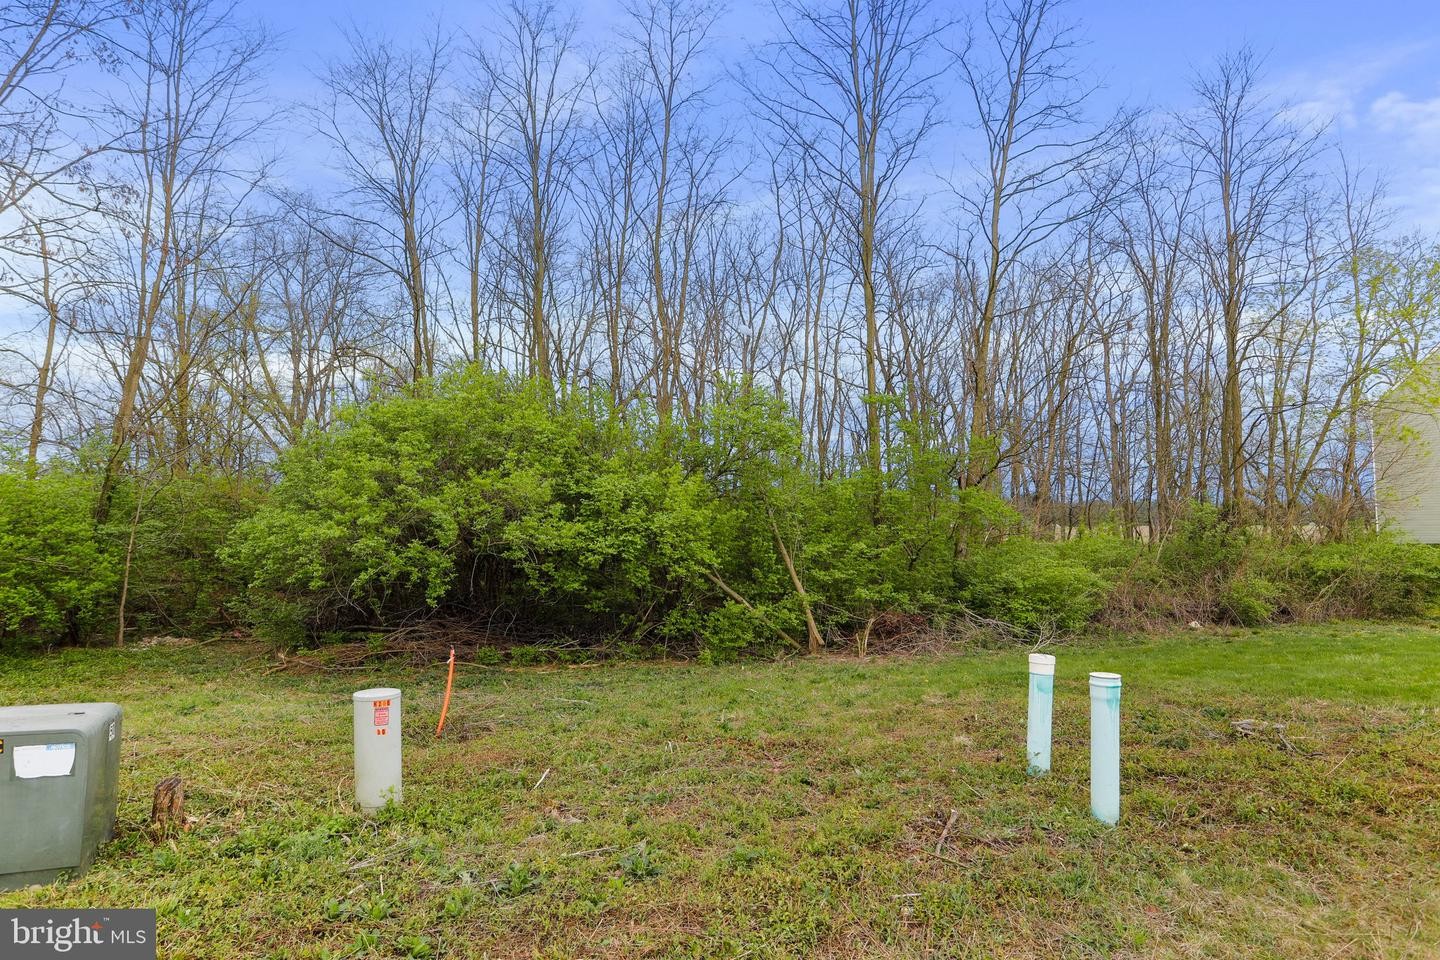 4. Lot 66 Wedgewood Dr